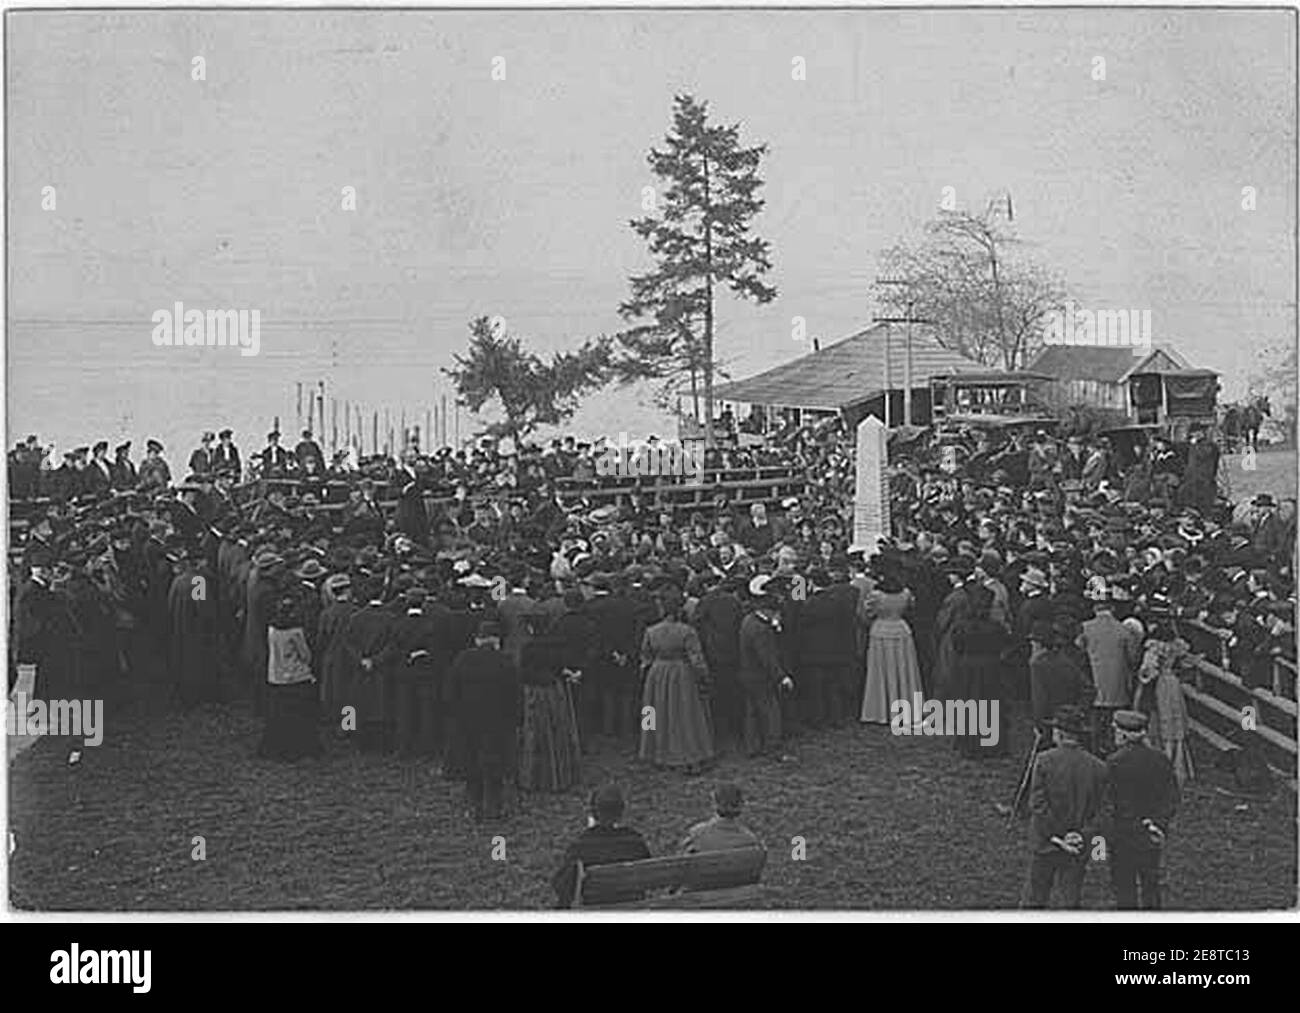 Monument dedication at Alki Point showing Edmond Meany giving an oration, West Seattle neighborhood, Seattle, November 13, 1905 (PEISER 131). Stock Photo